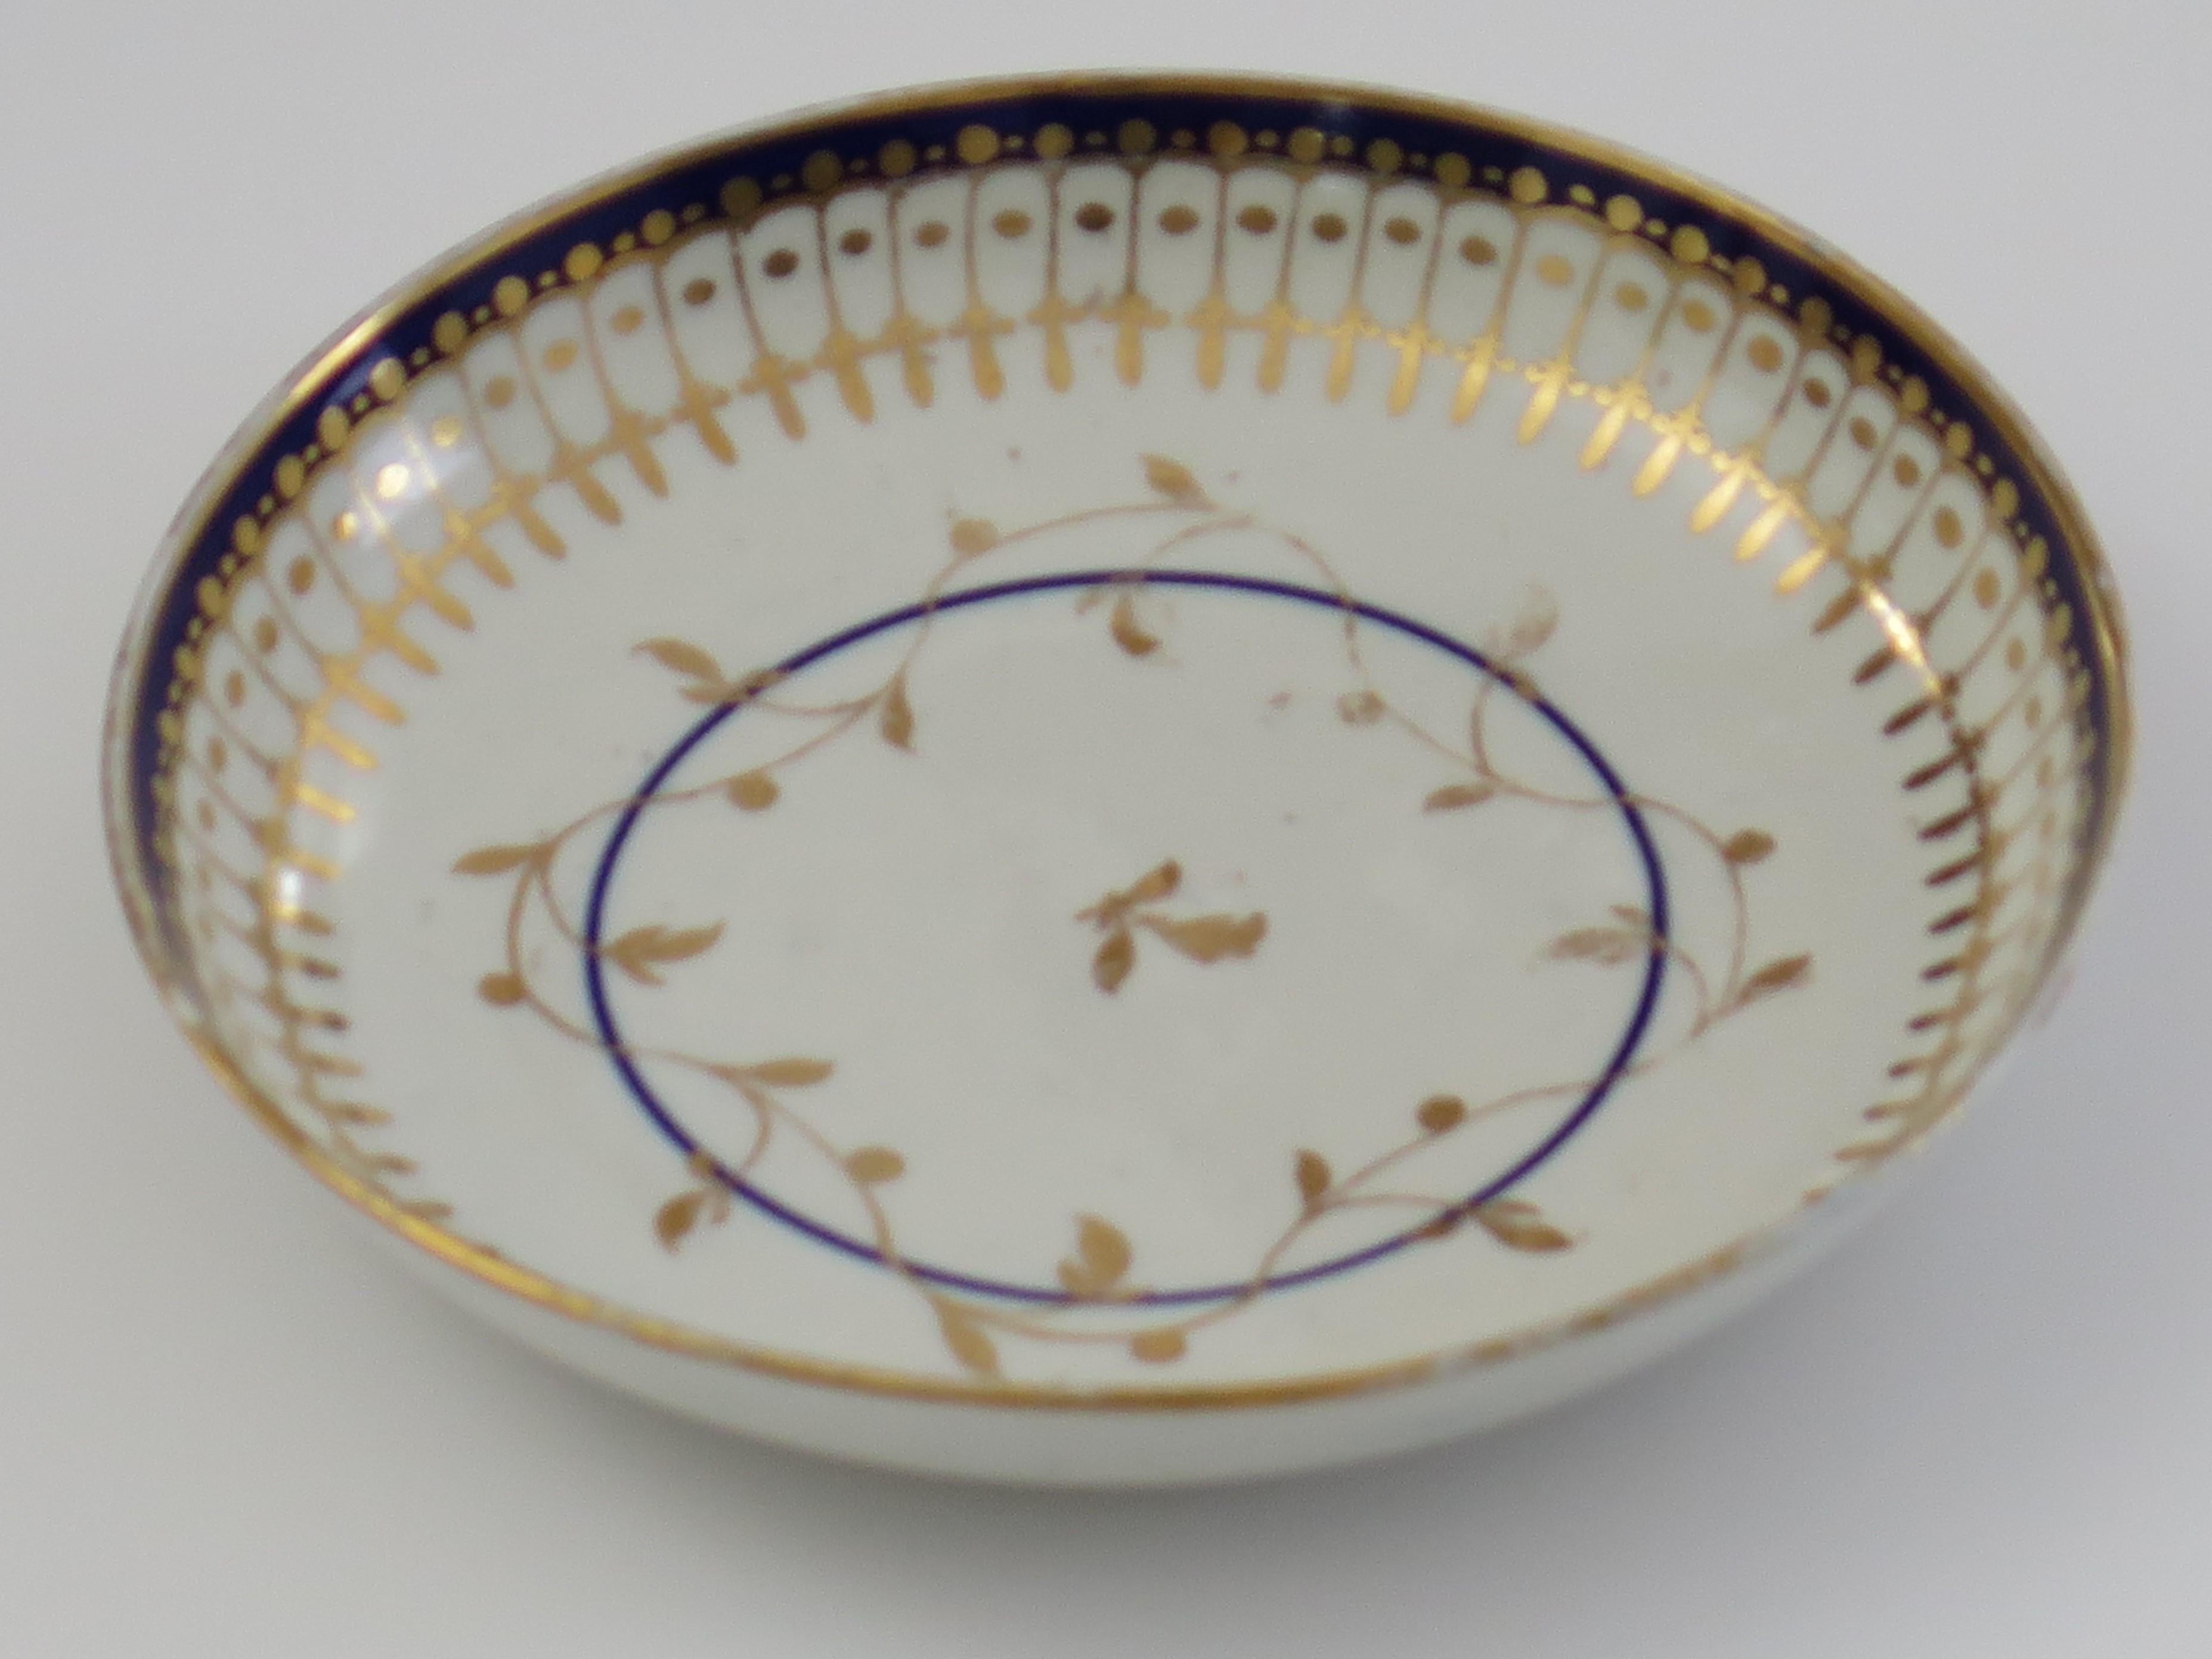 George III 18th Century Worcester Porcelain Saucer Dish or Bowl Blue & Gold Ptn, circa 1780 For Sale